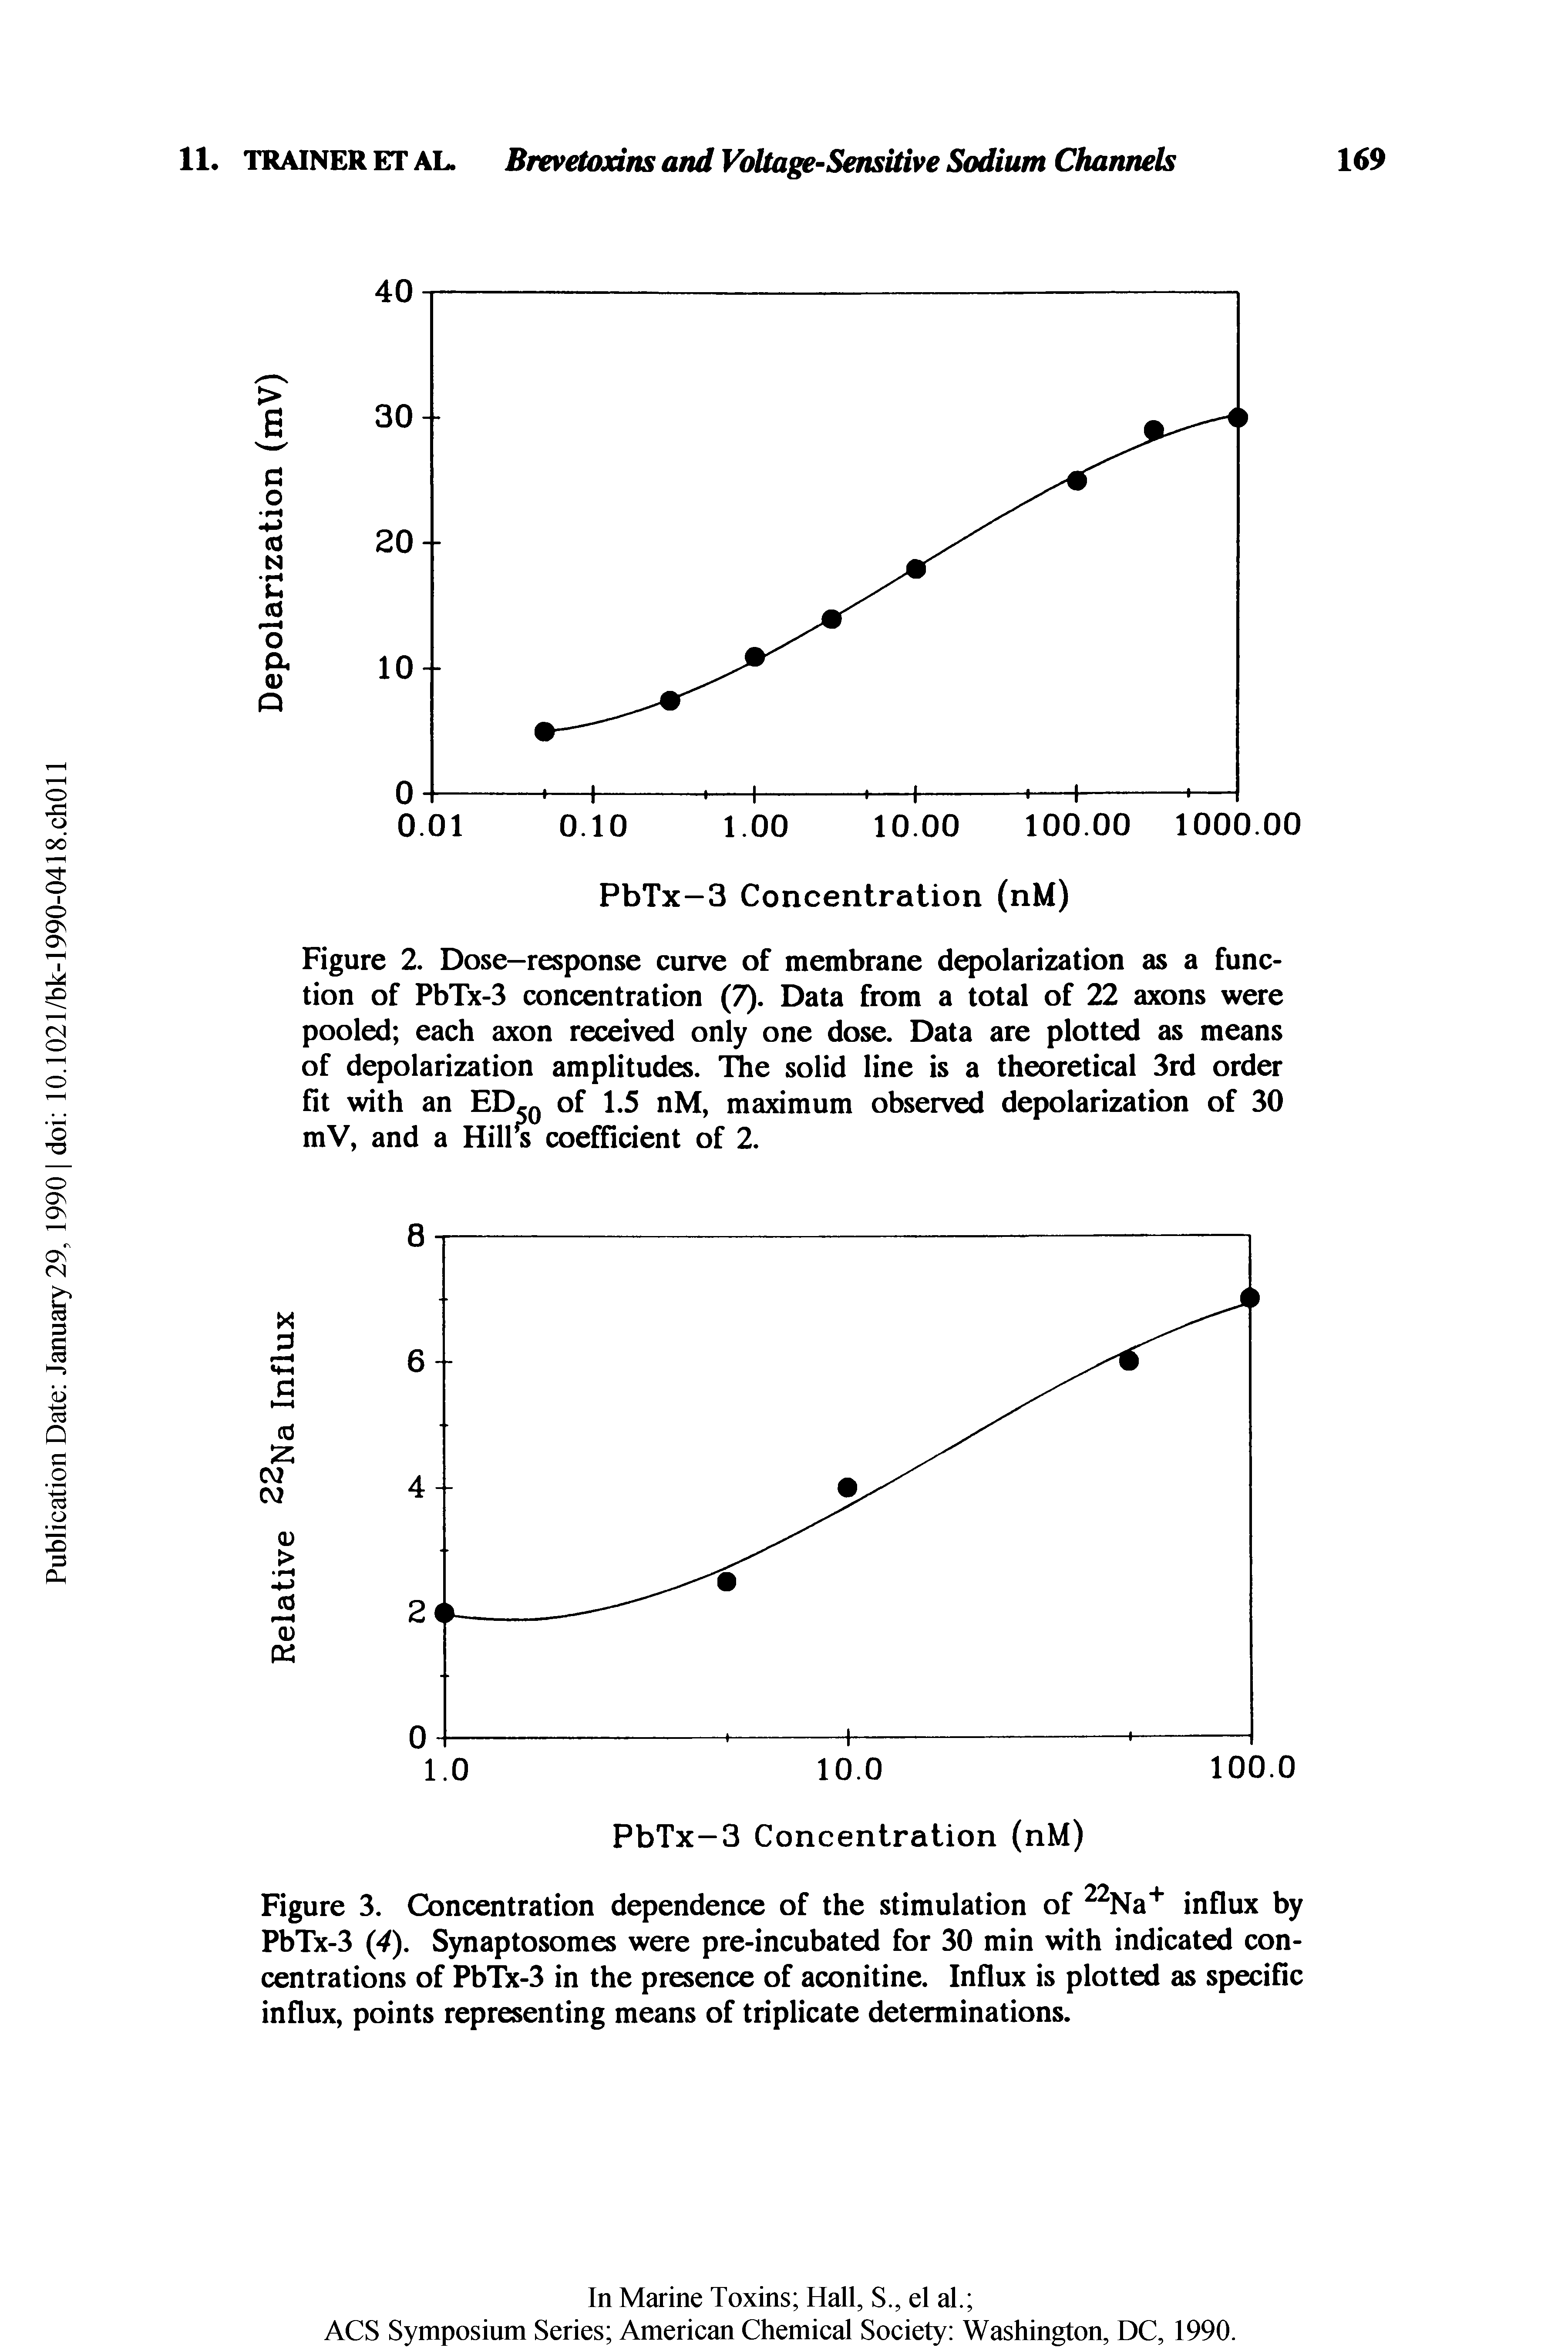 Figure 2. Dose-response curve of membrane depolarization as a function of PbTx-3 concentration (7). Data from a total of 22 axons were pooled each axon received only one dose. Data are plotted as means of depolarization amplitudes. TTie solid line is a theoretical 3rd order fit with an ED.q of 1.5 nM, maximum observed depolarization of 30 mV, and a Hill s coefficient of 2.